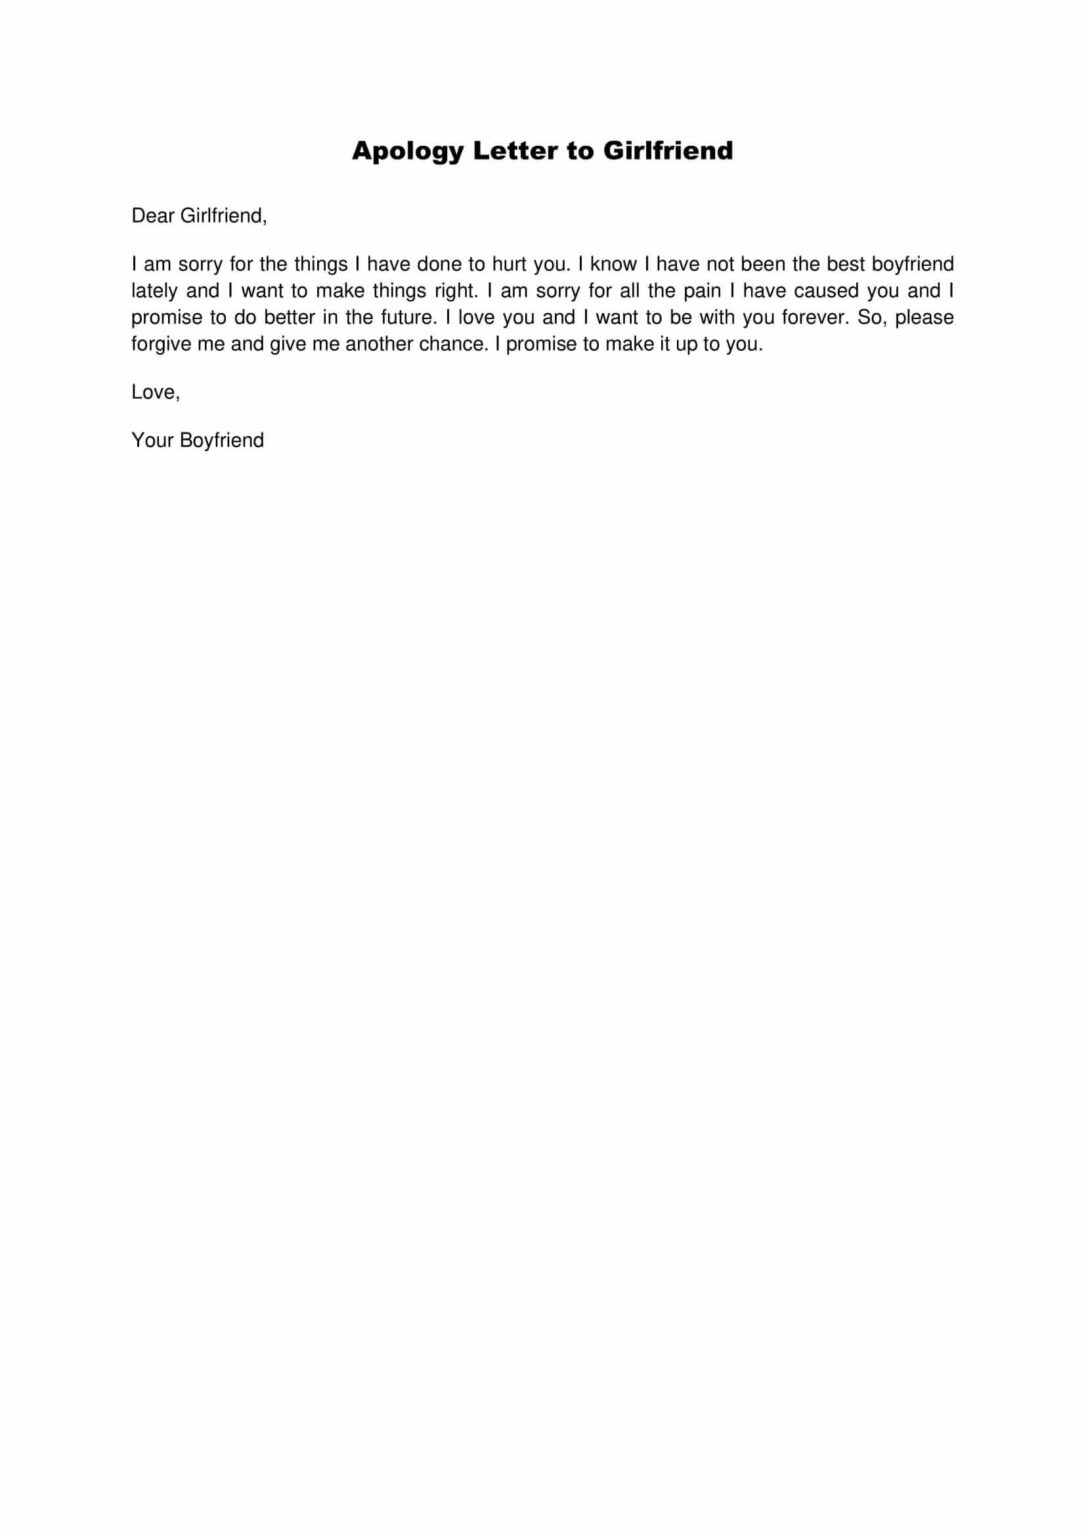 Apology Letter To Girlfriend 1086x1536 